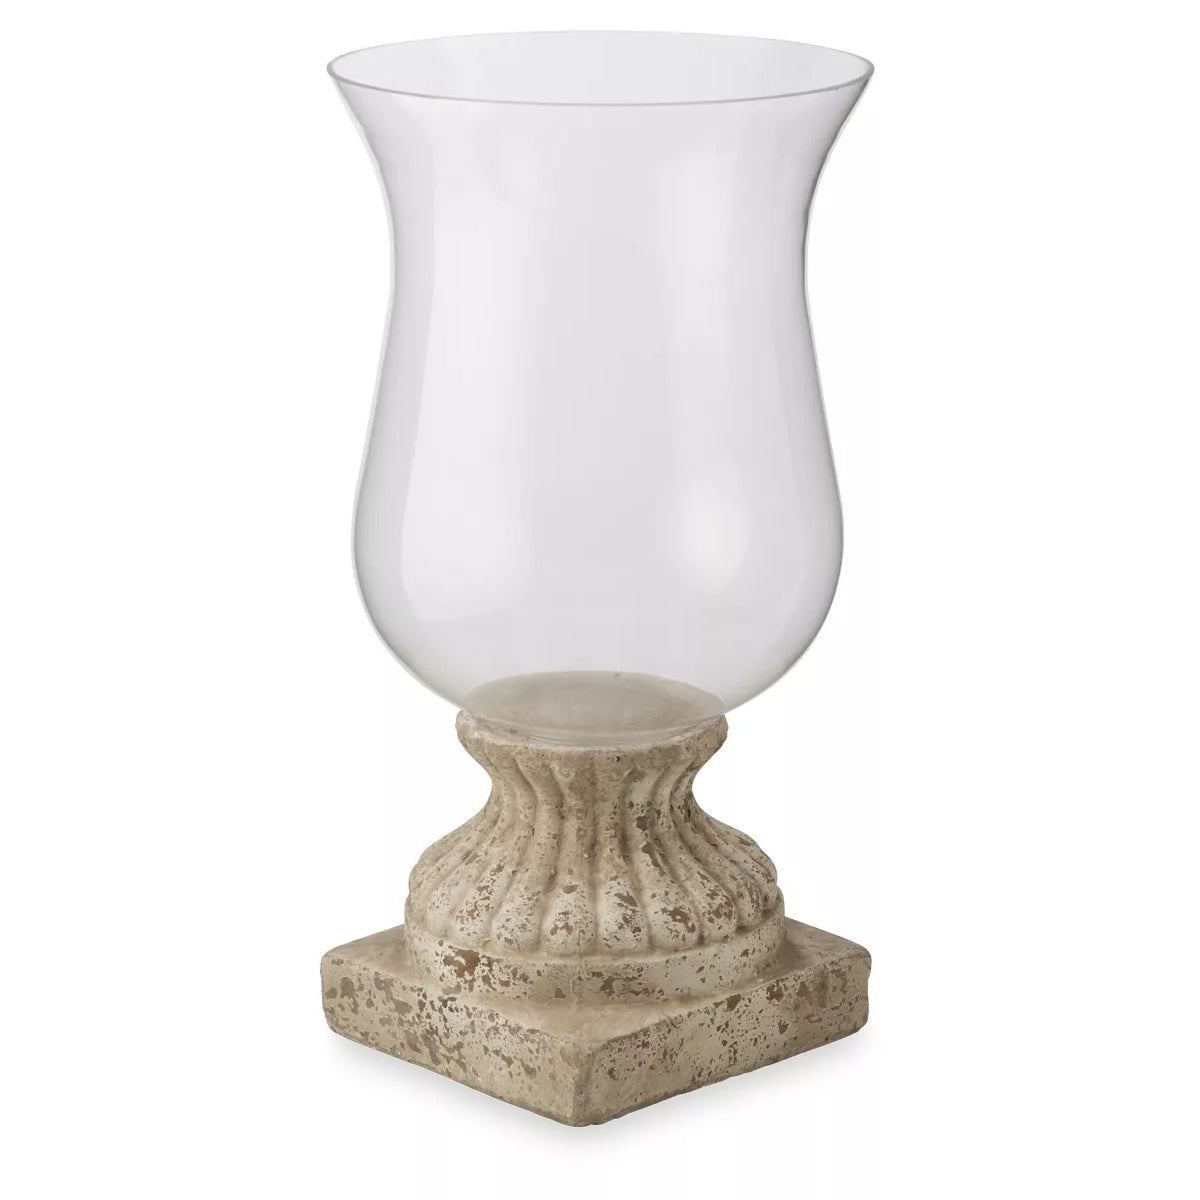 Hurricane Lamp On Stand - Large